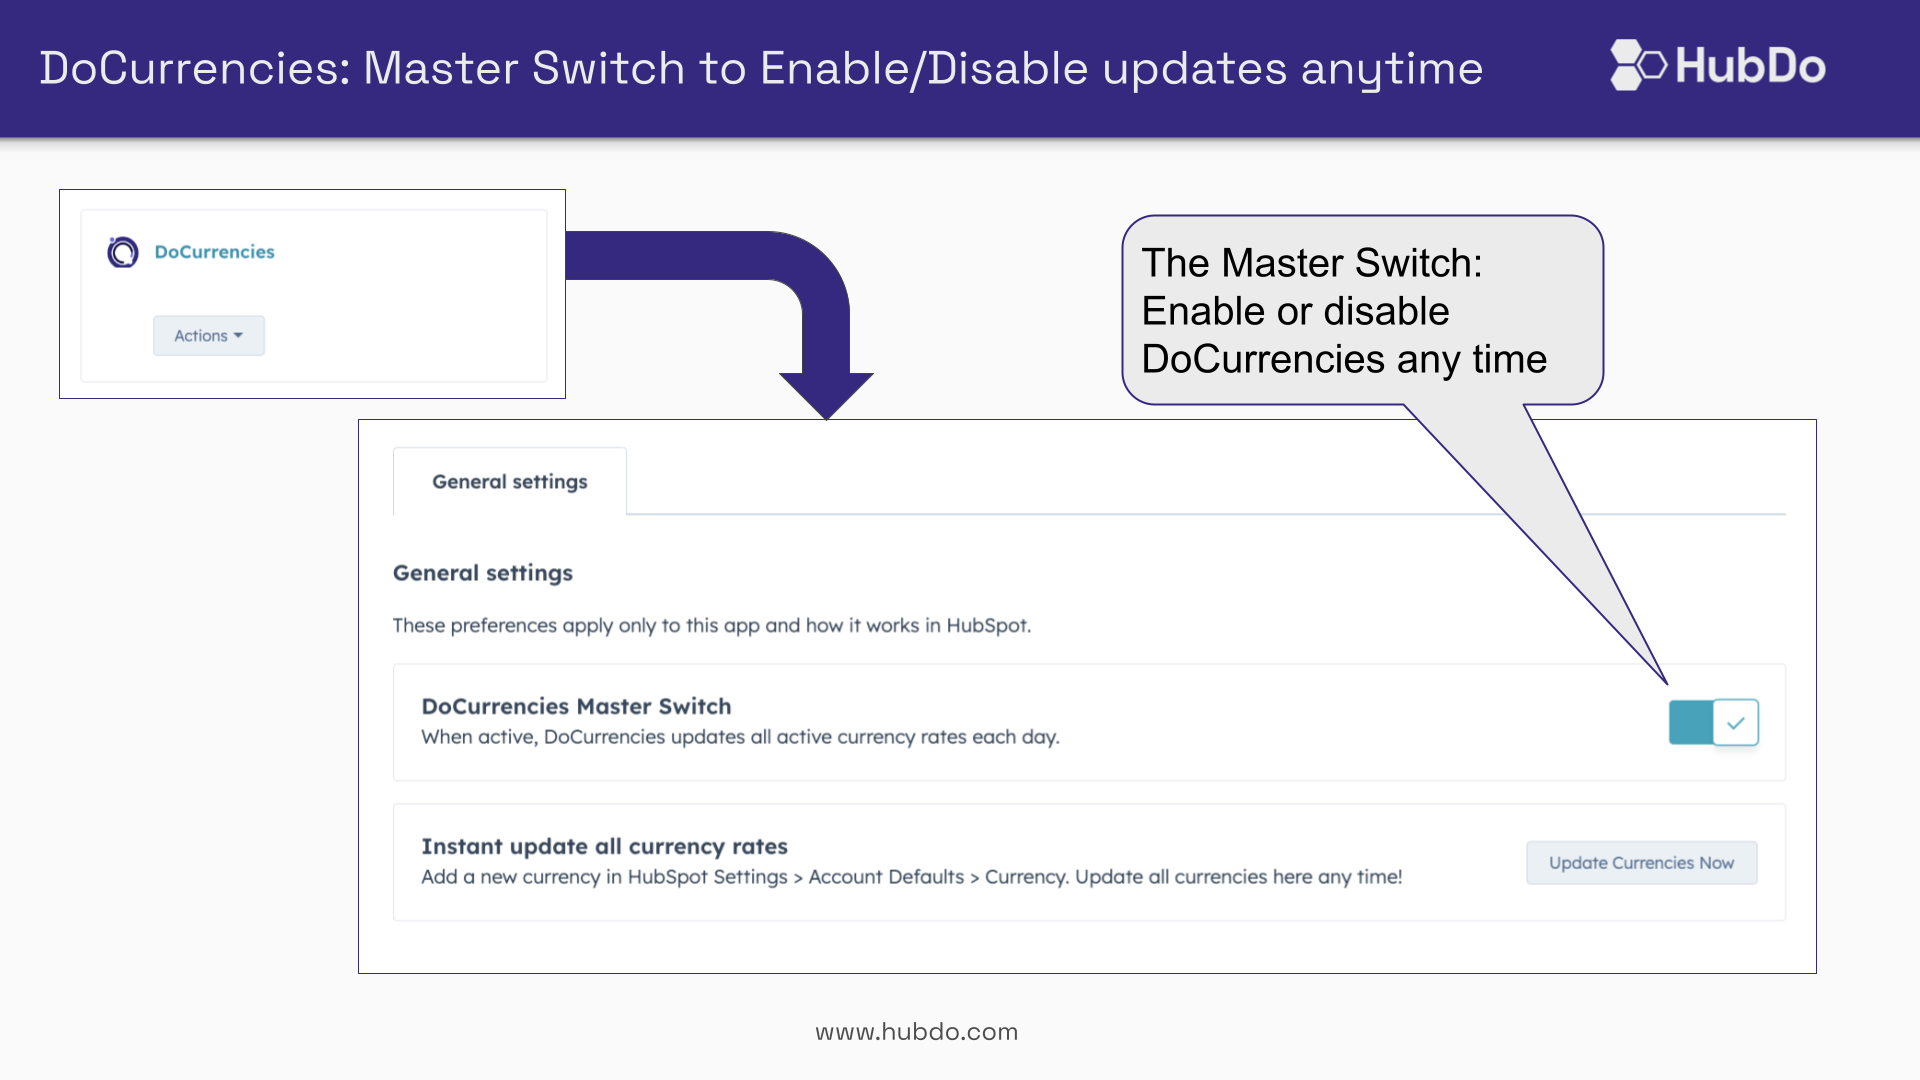 The Master Switch - DoCurrencies